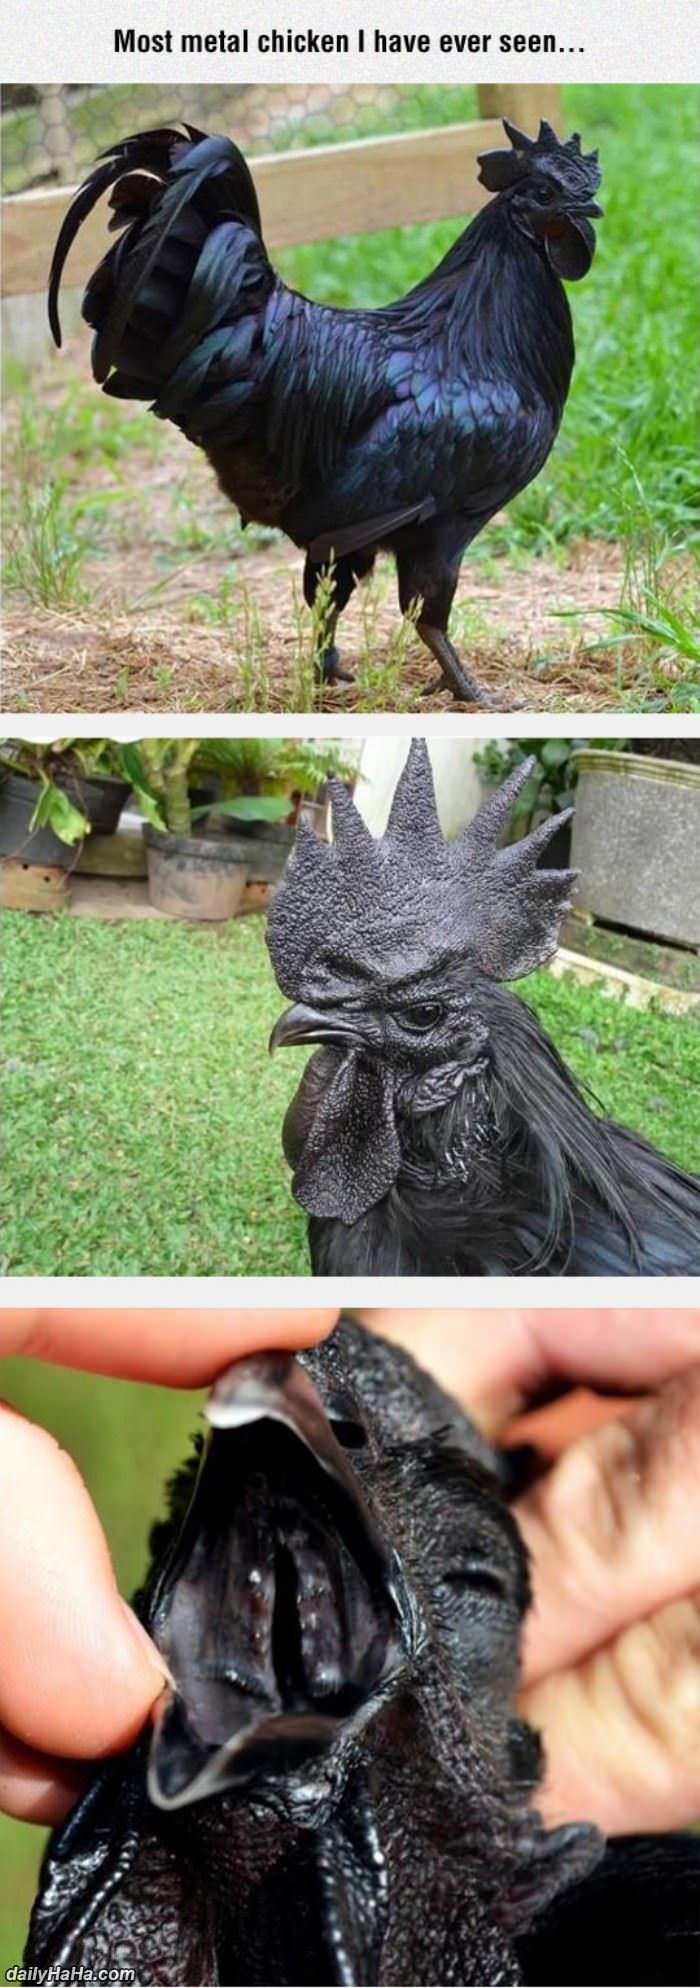 the most metal chicken ever funny picture